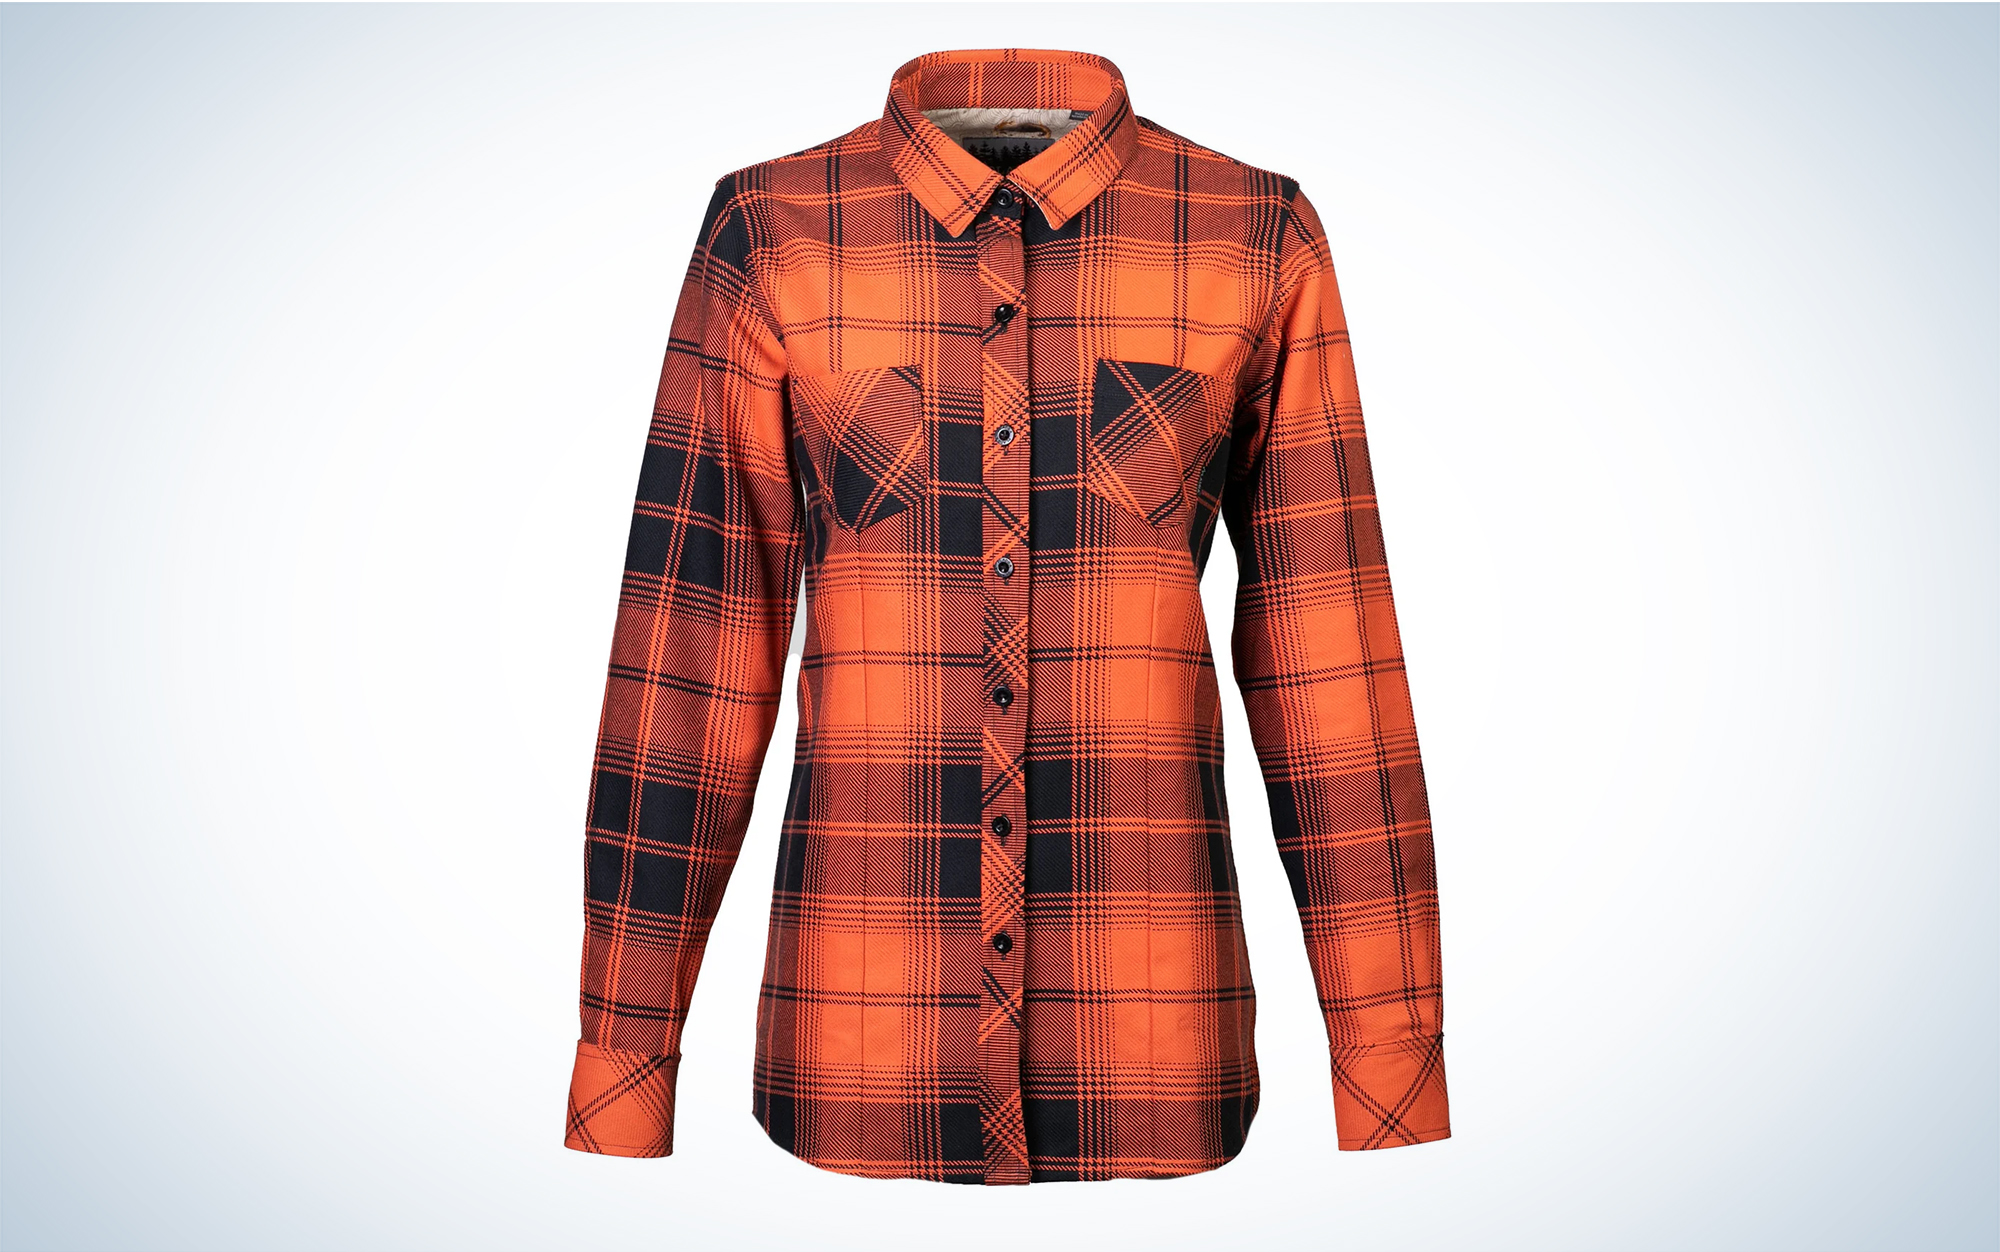 We tested the Pladra Leon Workhorse Flannel Shirt.